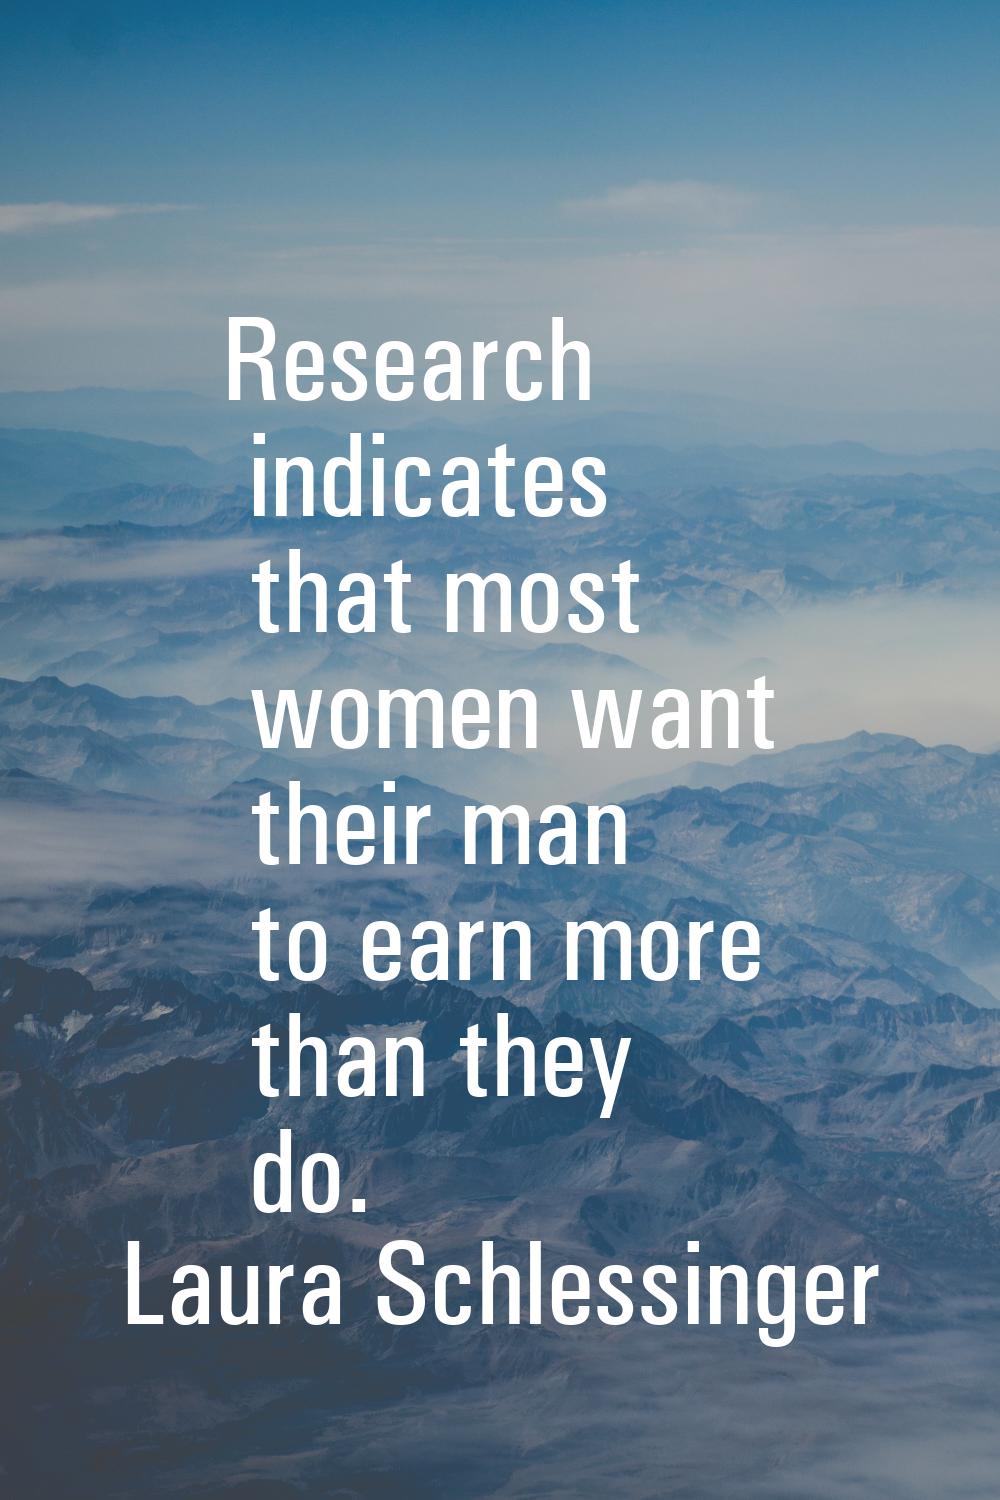 Research indicates that most women want their man to earn more than they do.